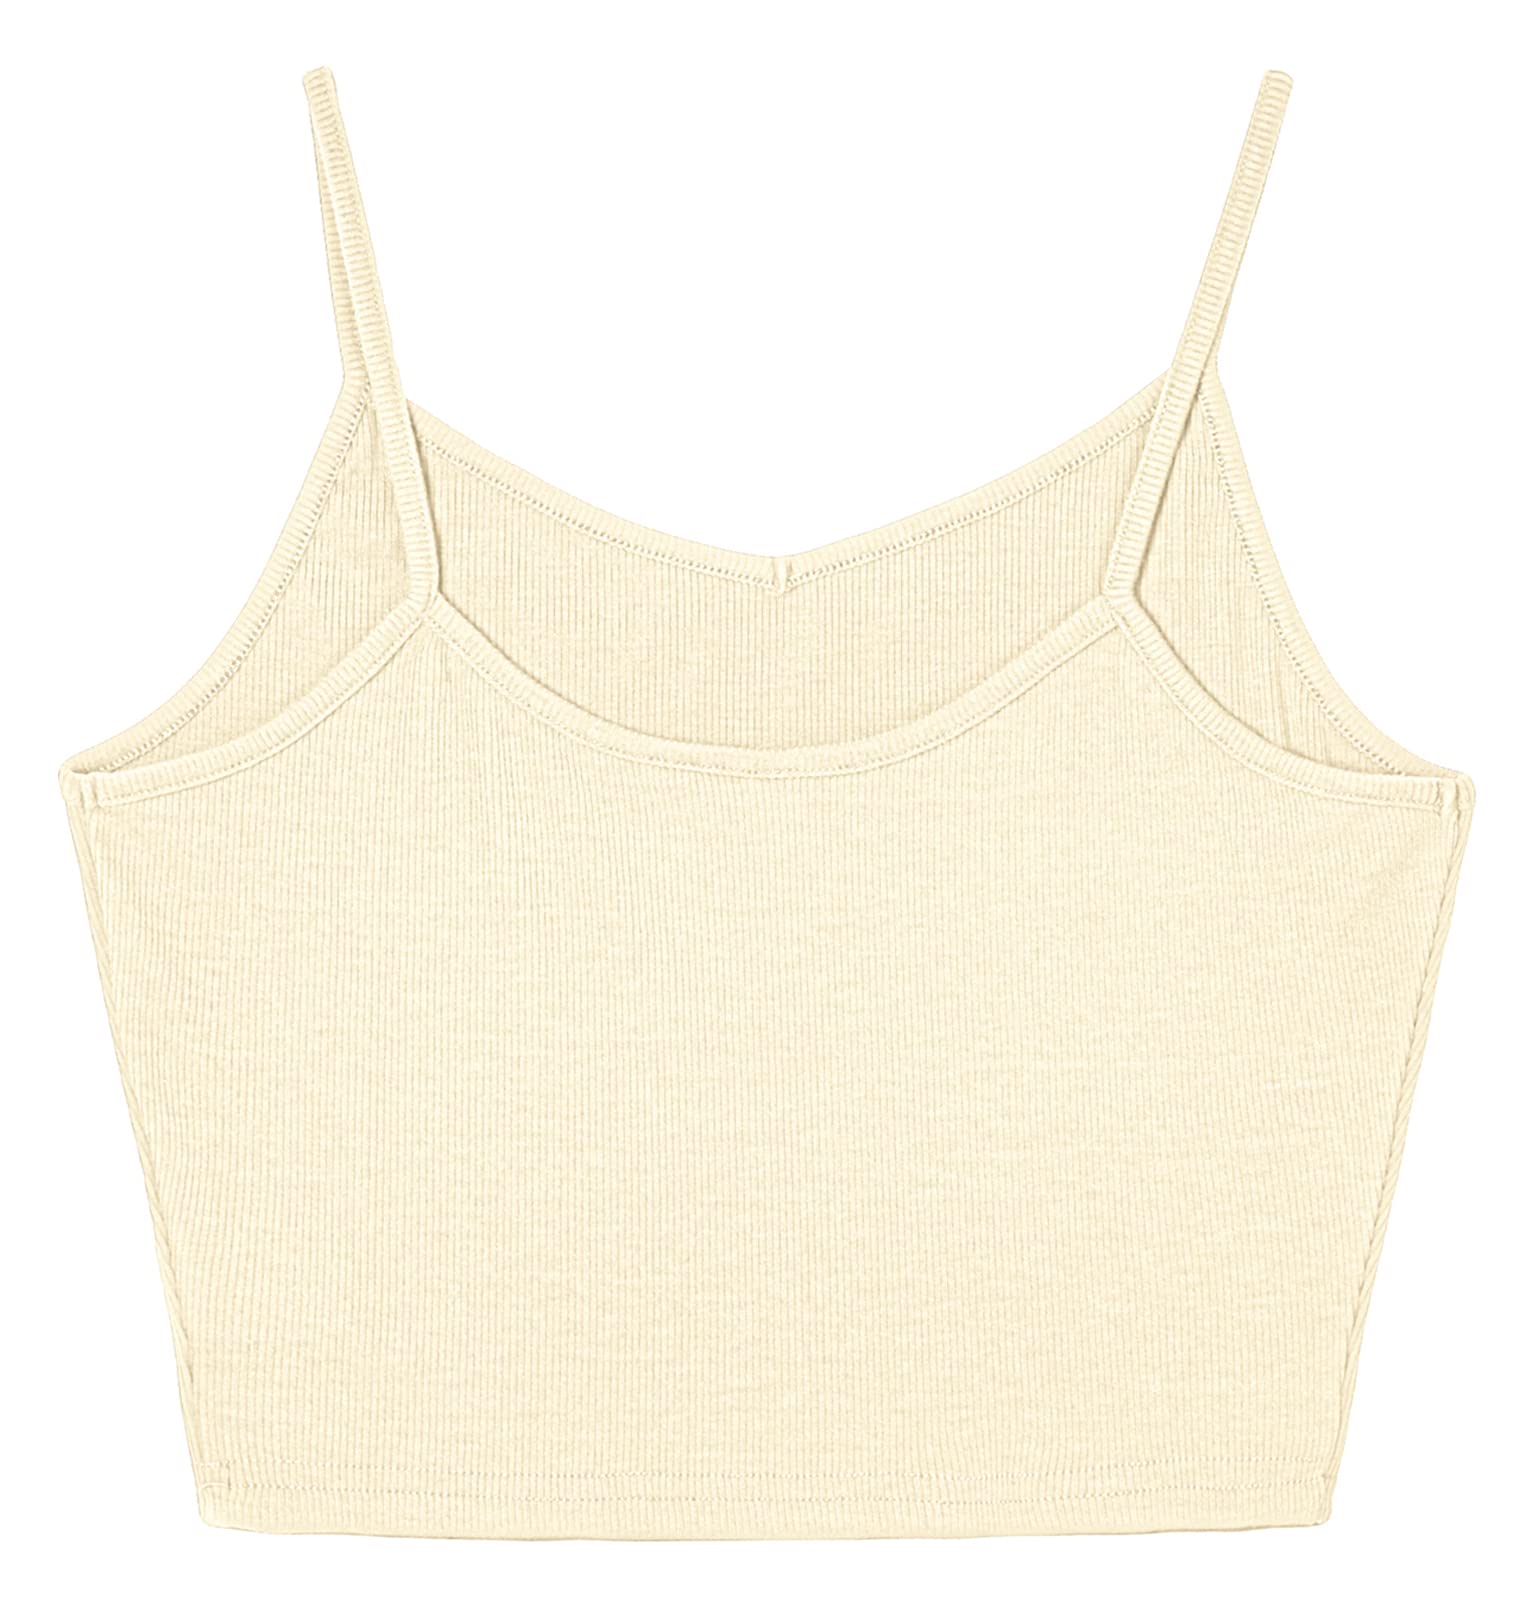 Women's Camisole Tank Tops Casual Basic Cami Plain Stretchy Ribbed Shirts S  -2xl